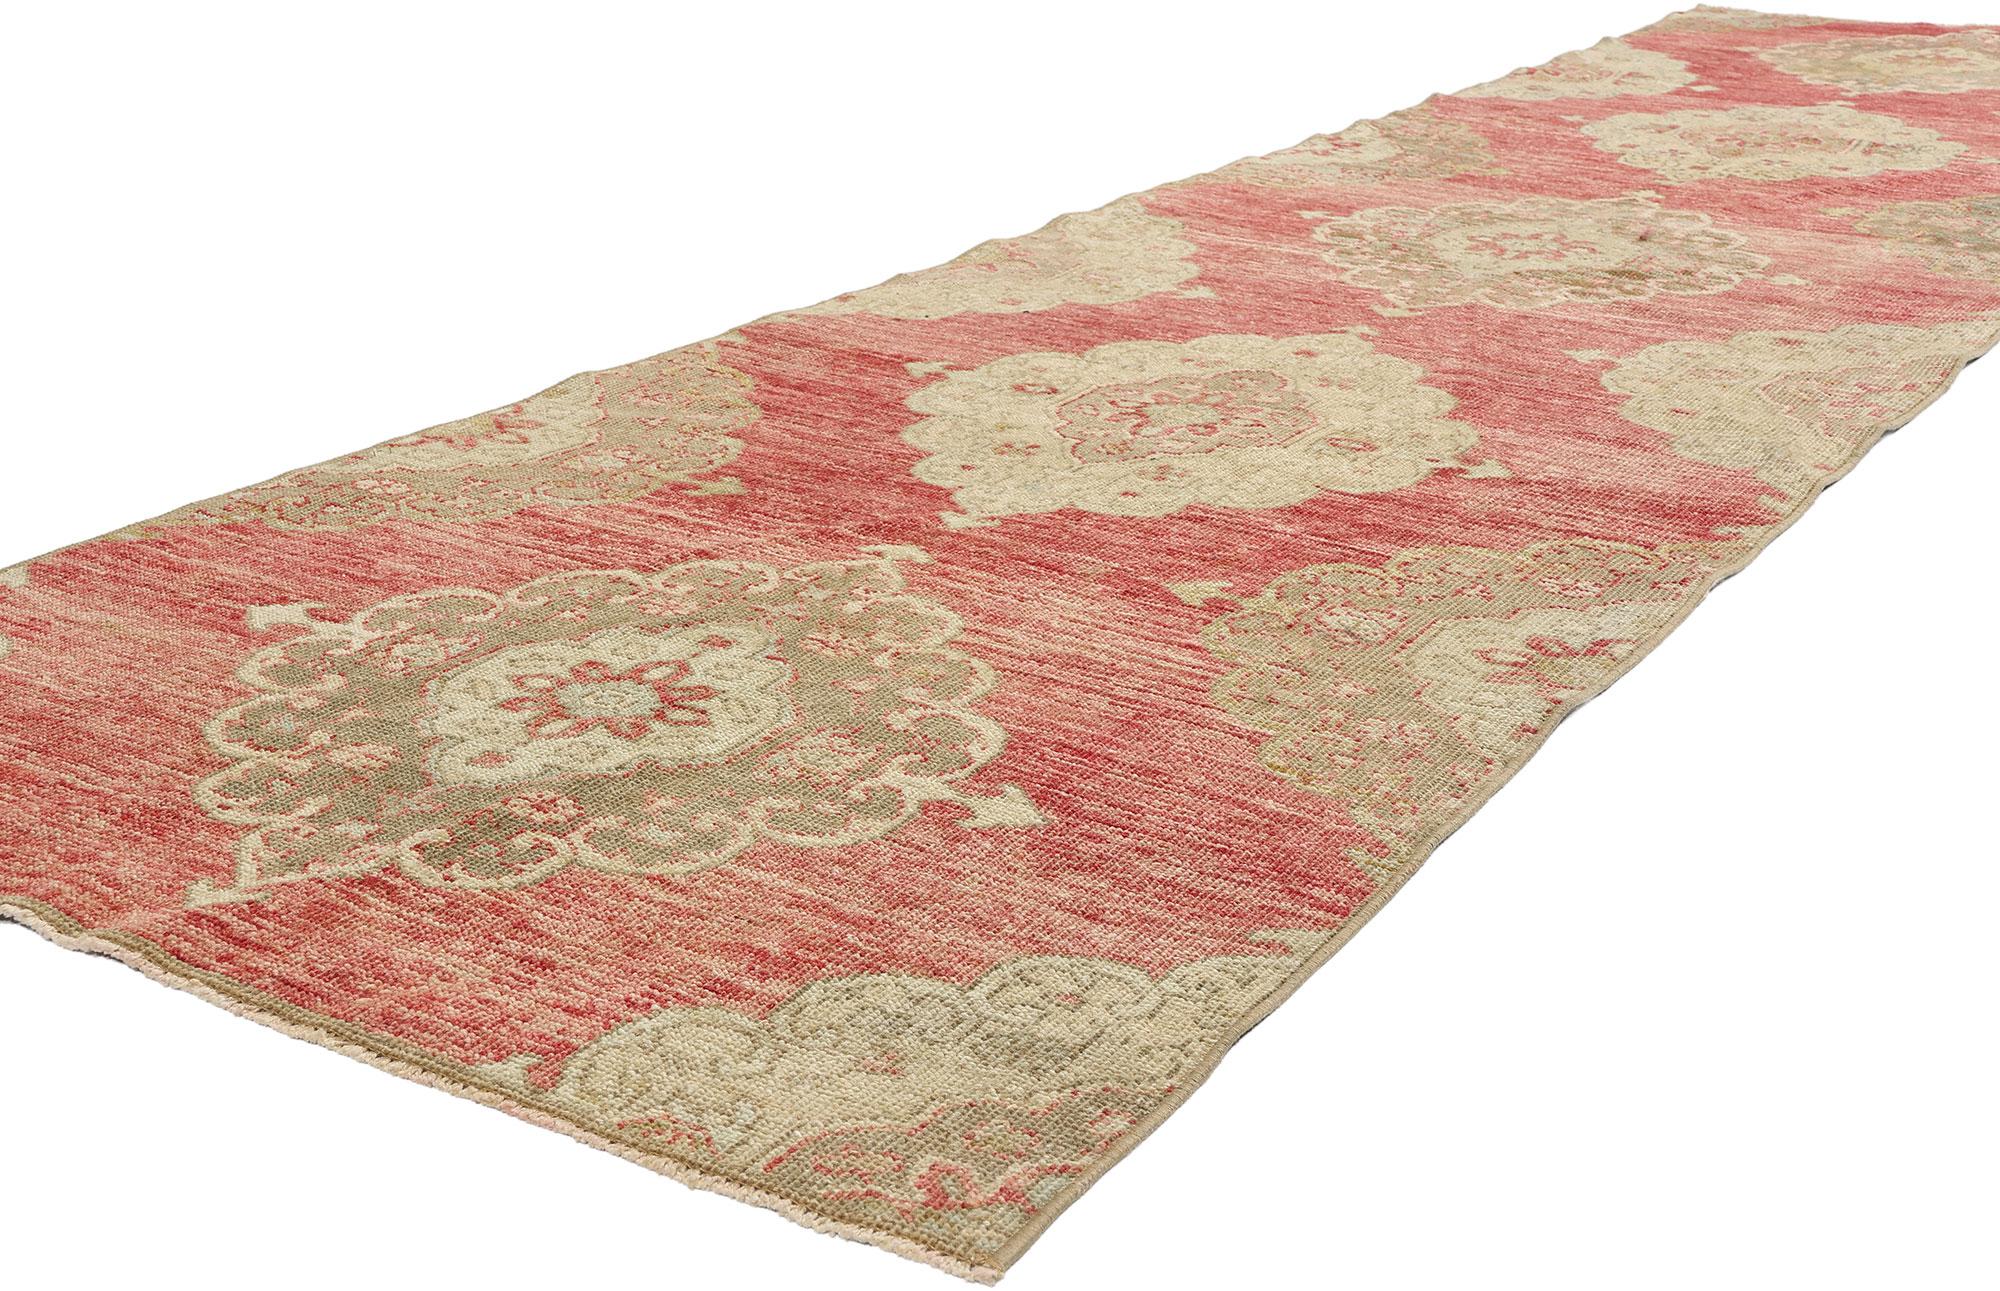 53919 Vintage Red Turkish Oushak Rug Runner, 03'01 x 12'00. Turkish Oushak carpet runners represent a distinctive style of traditional rug originating from the Oushak region in western Turkey. Renowned for their exceptional designs, these runners